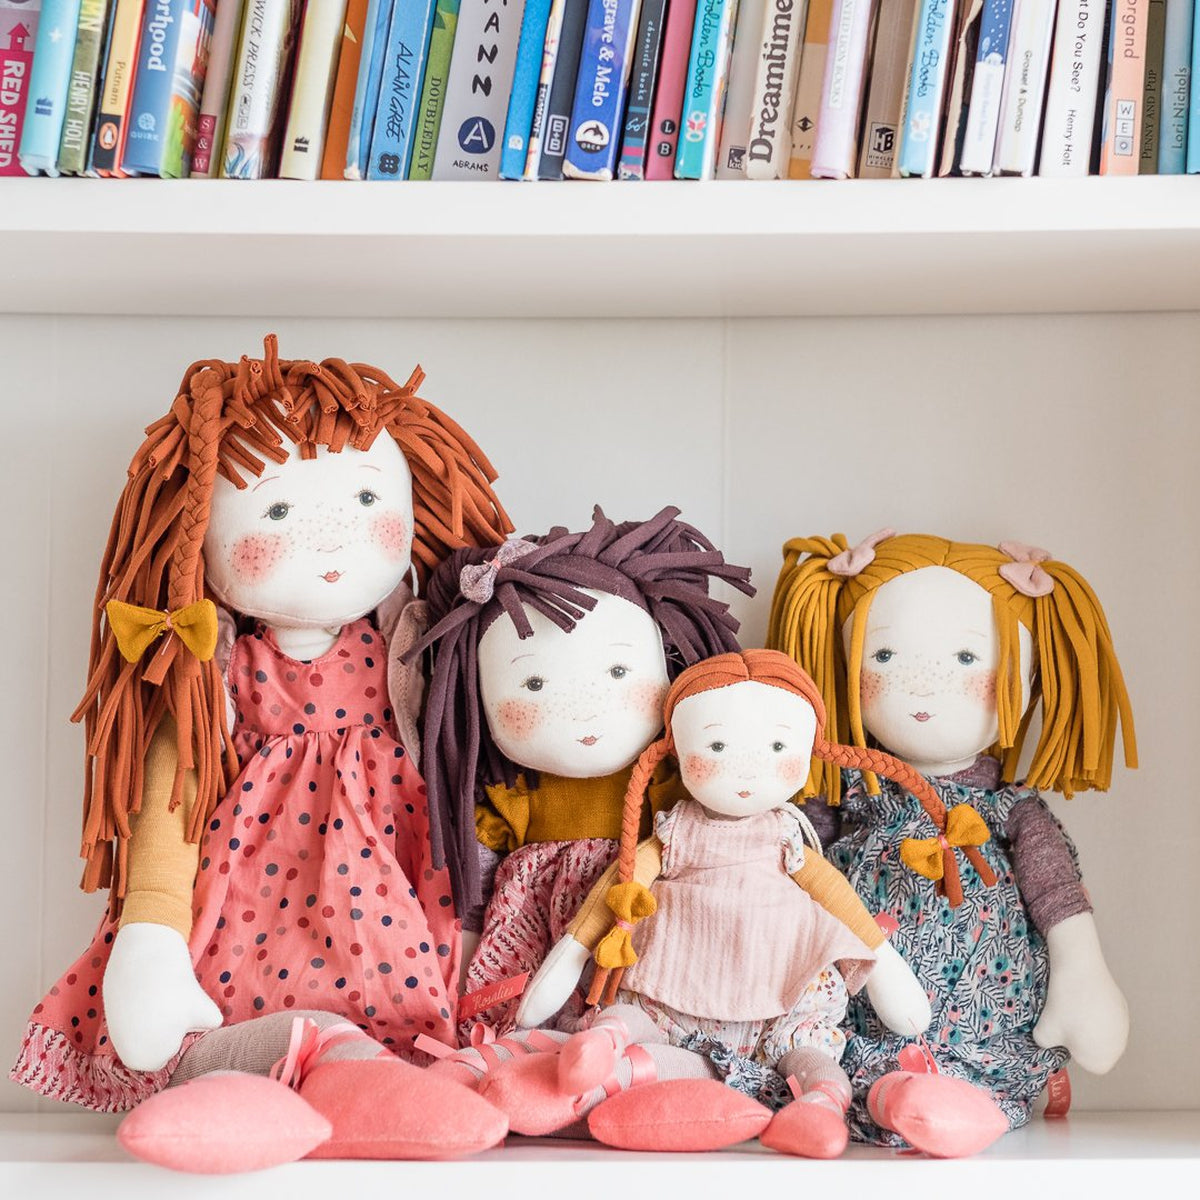 Dolls and Accessories for 1 Year Olds – Dilly Dally Kids